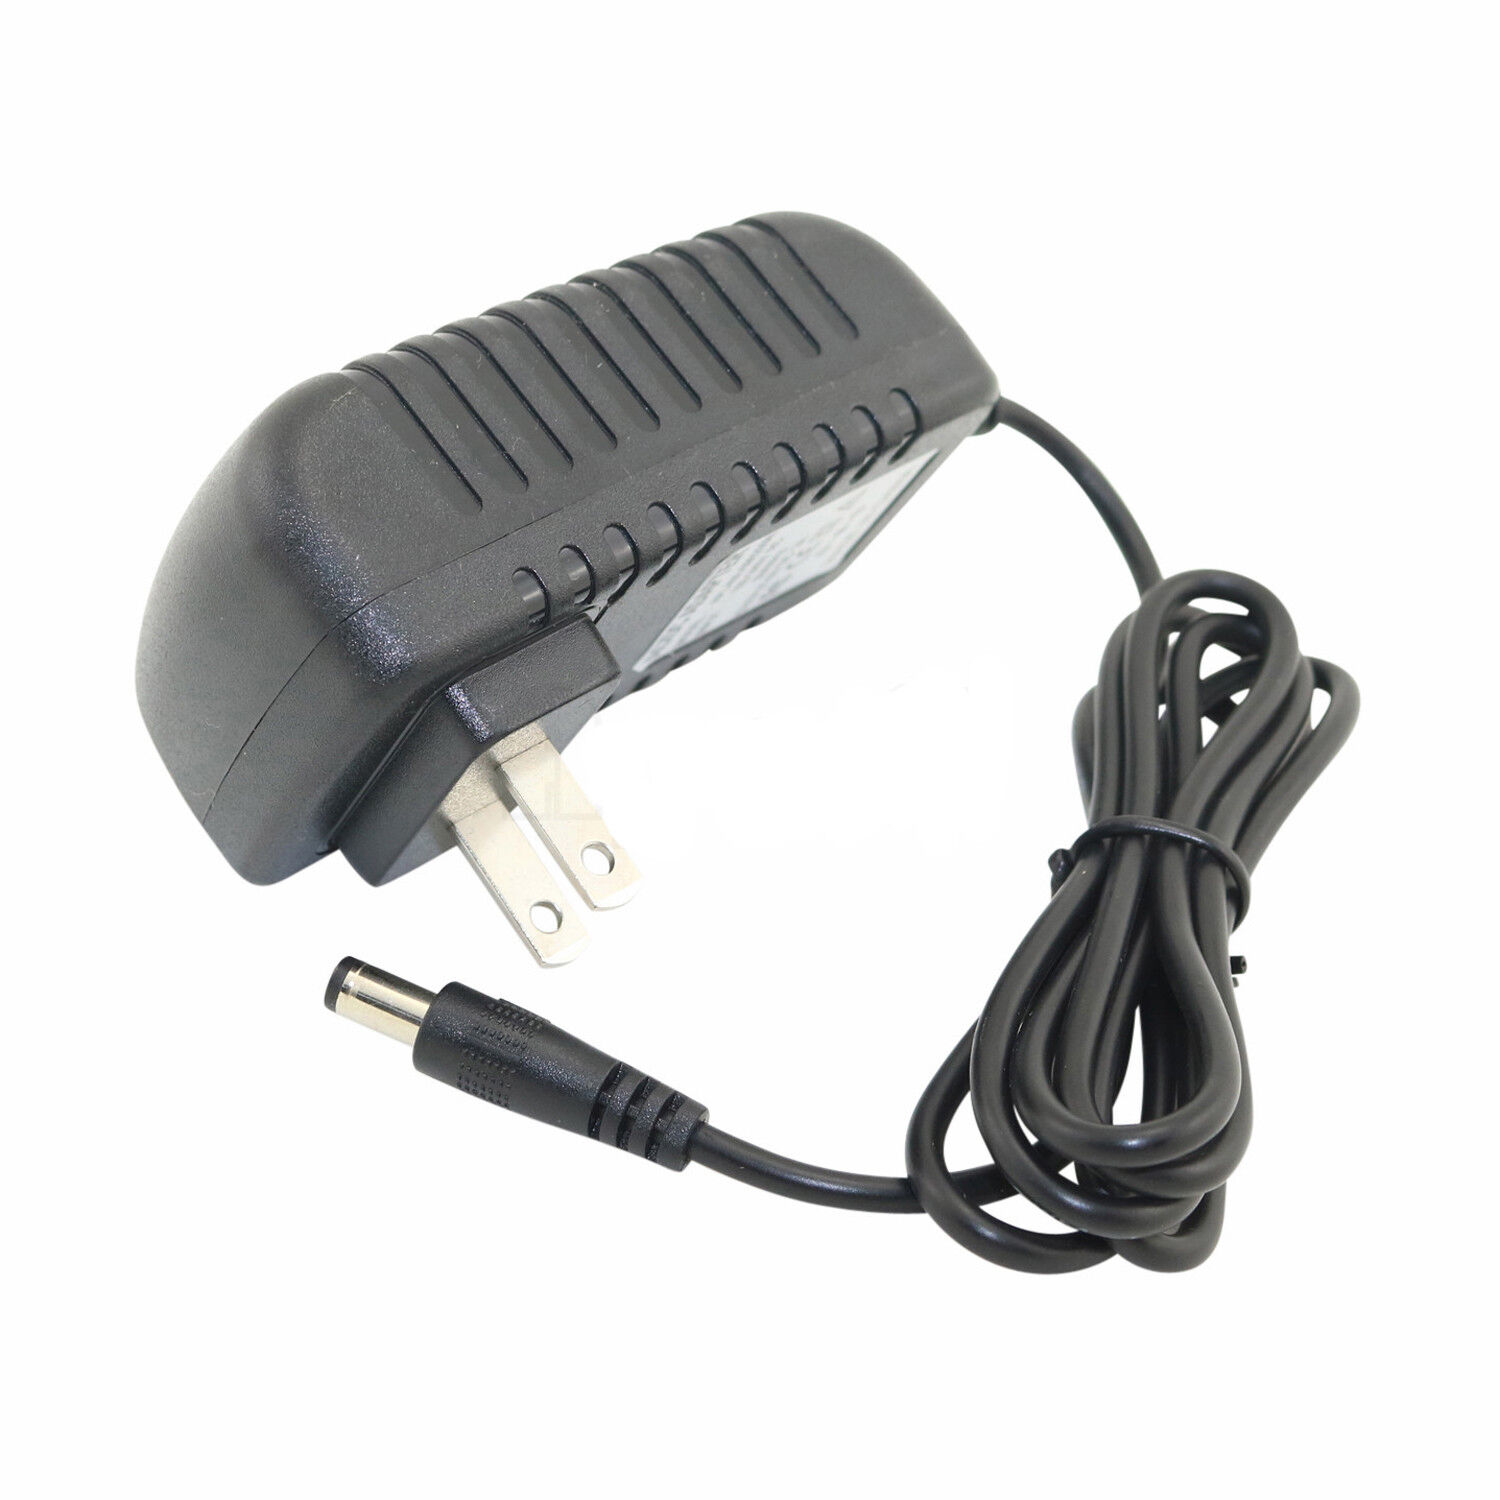 Power supply Transformer Charger for ALL Cricut Expression Machine Ac Adapter Features: Input voltage: 100-240VAC, (wor